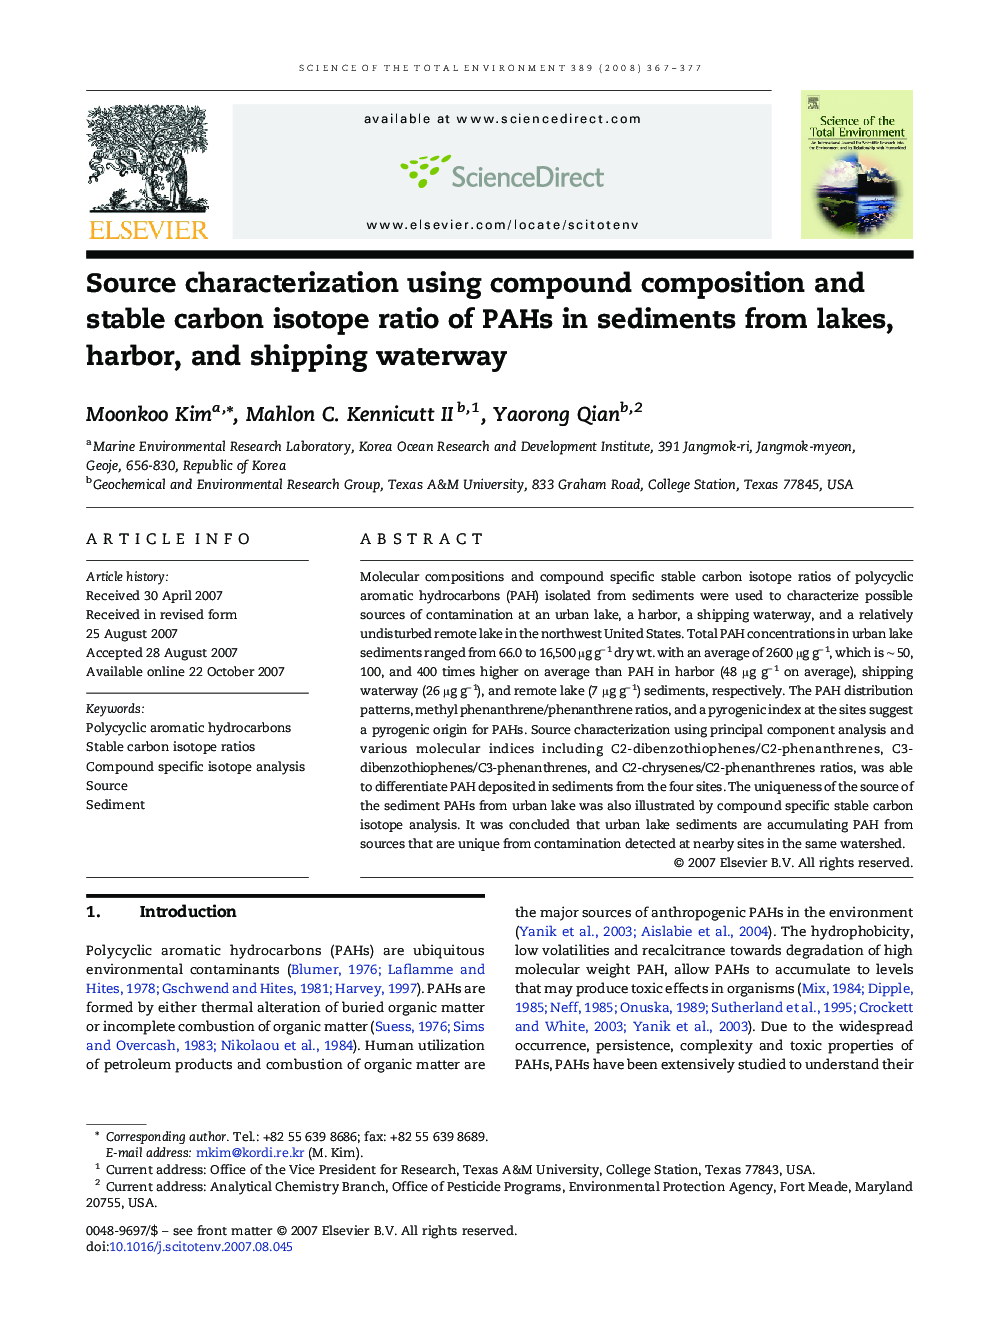 Source characterization using compound composition and stable carbon isotope ratio of PAHs in sediments from lakes, harbor, and shipping waterway